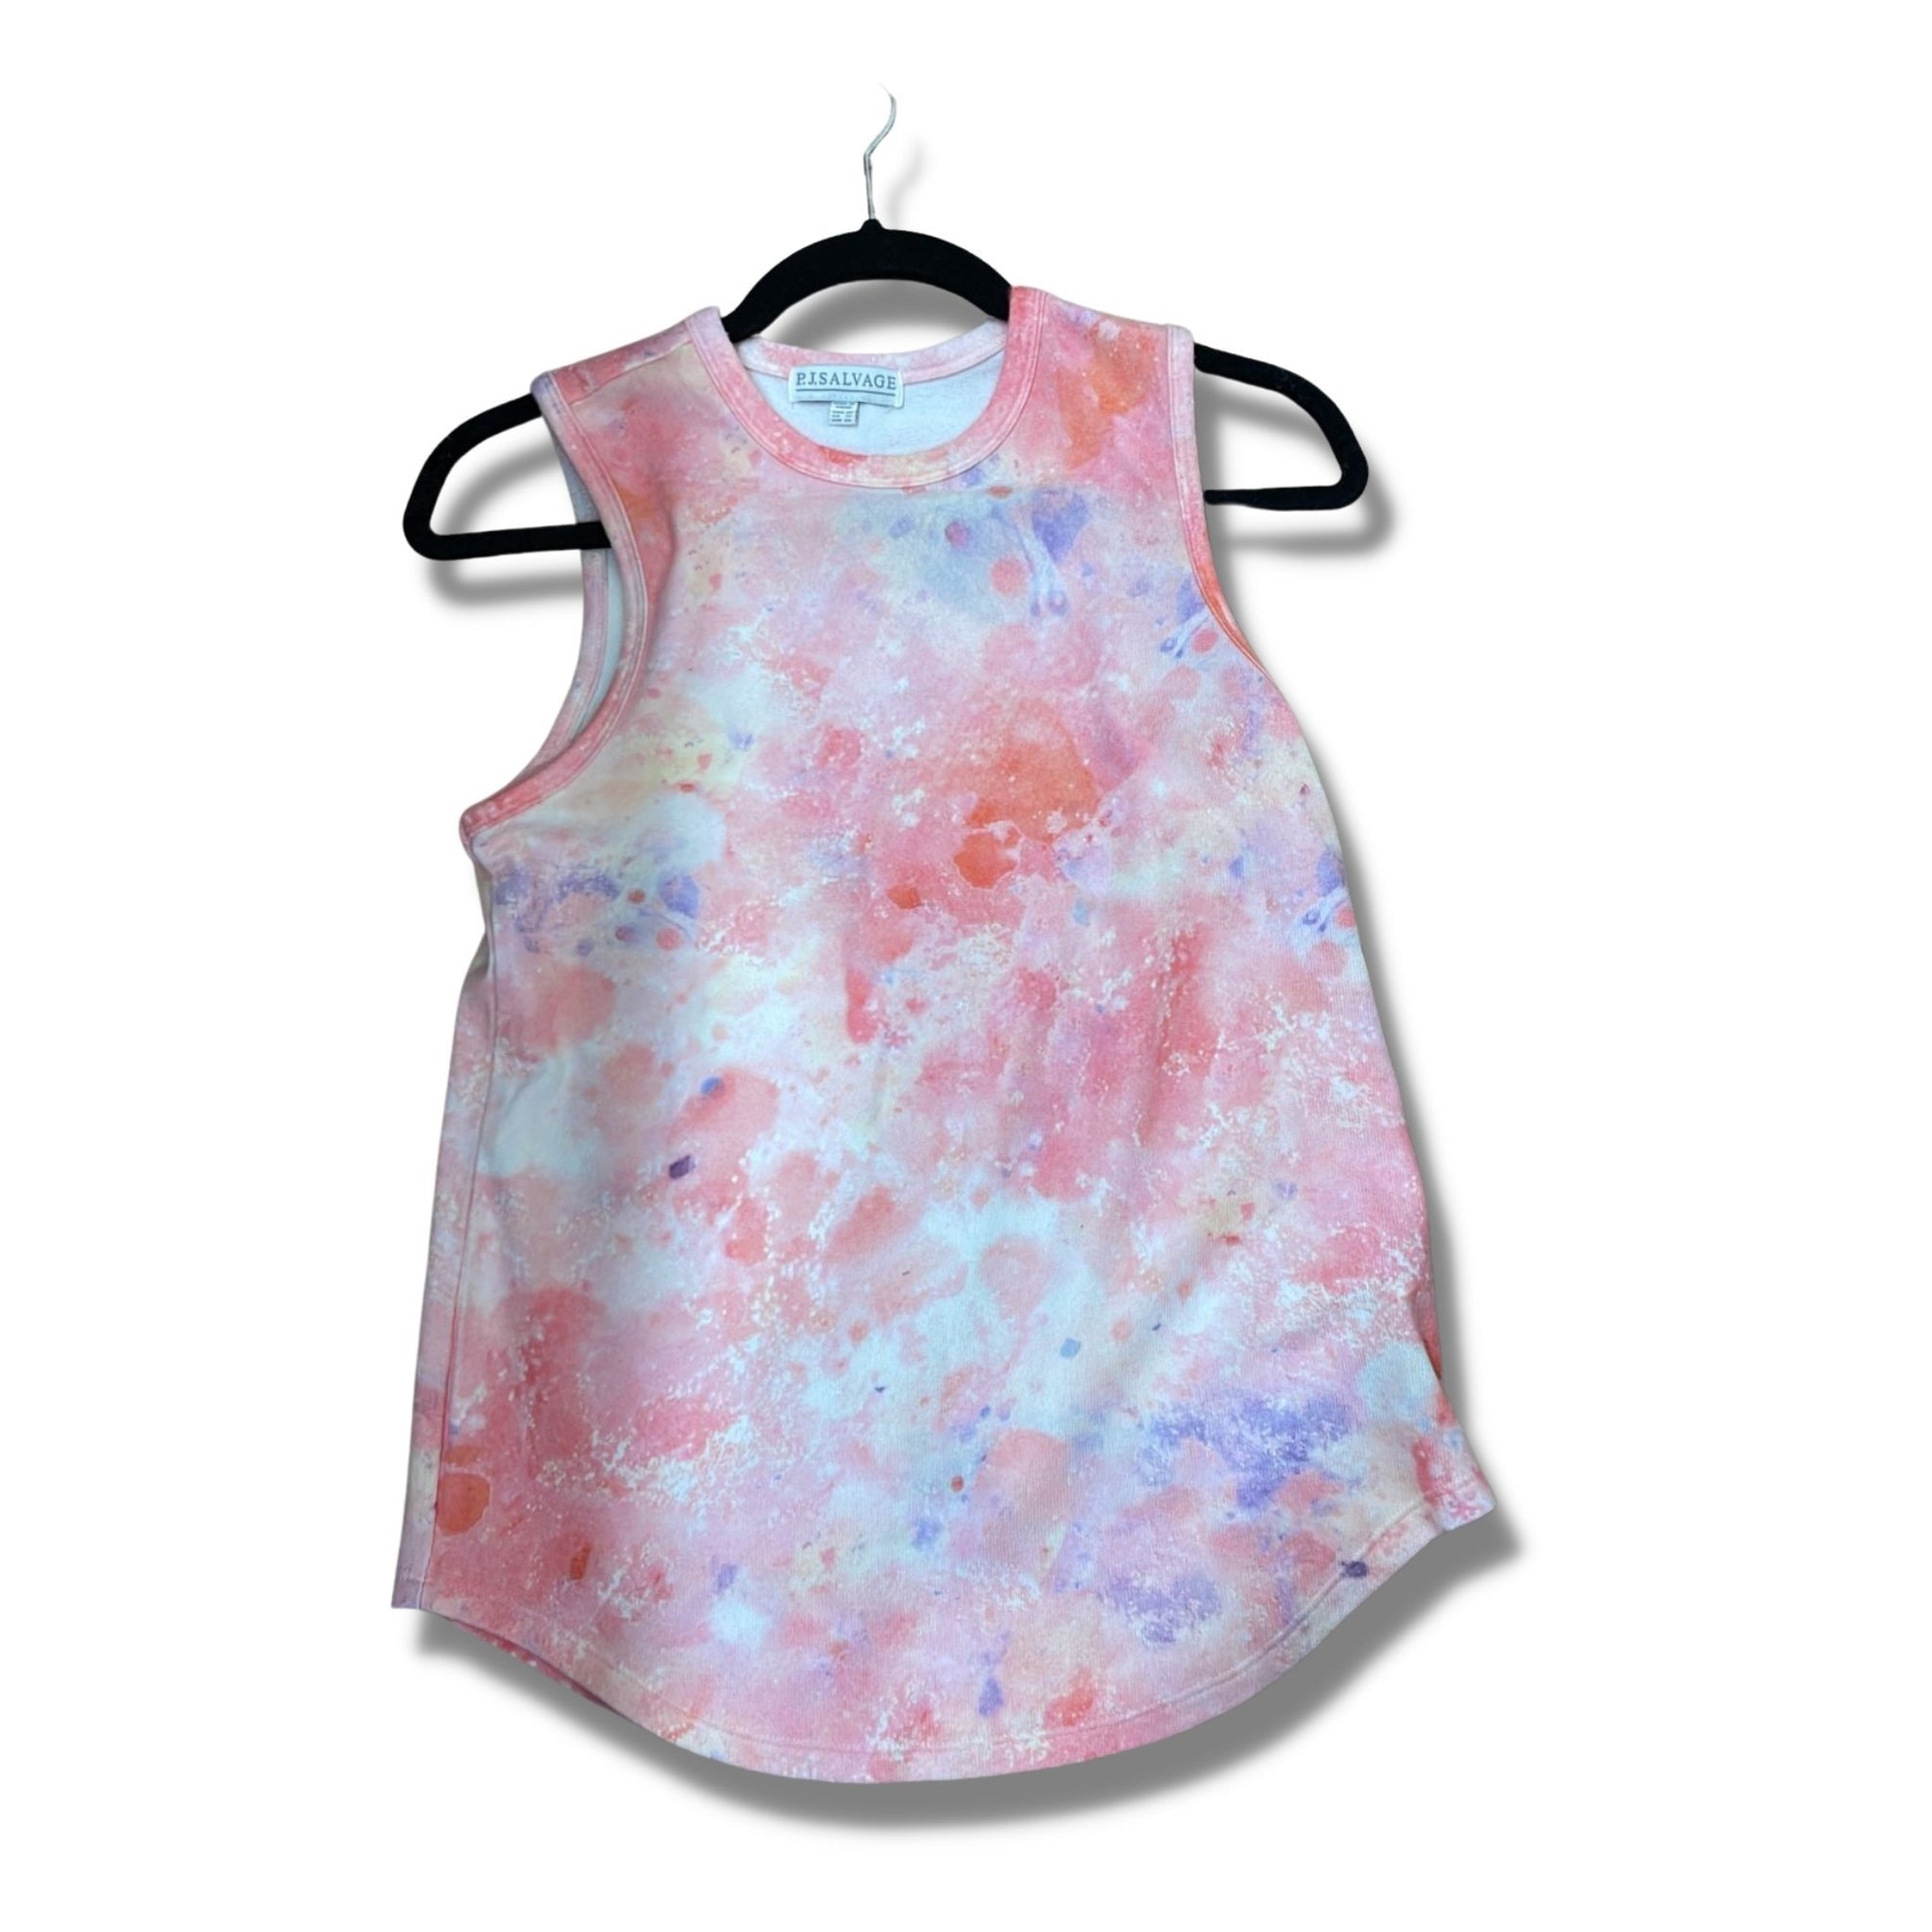 PJ Salvage Coral Sleeveless Top Melting Crayons - a Spirit Animal - Tank Tops $45-$60 Color Coral new four-months-ago